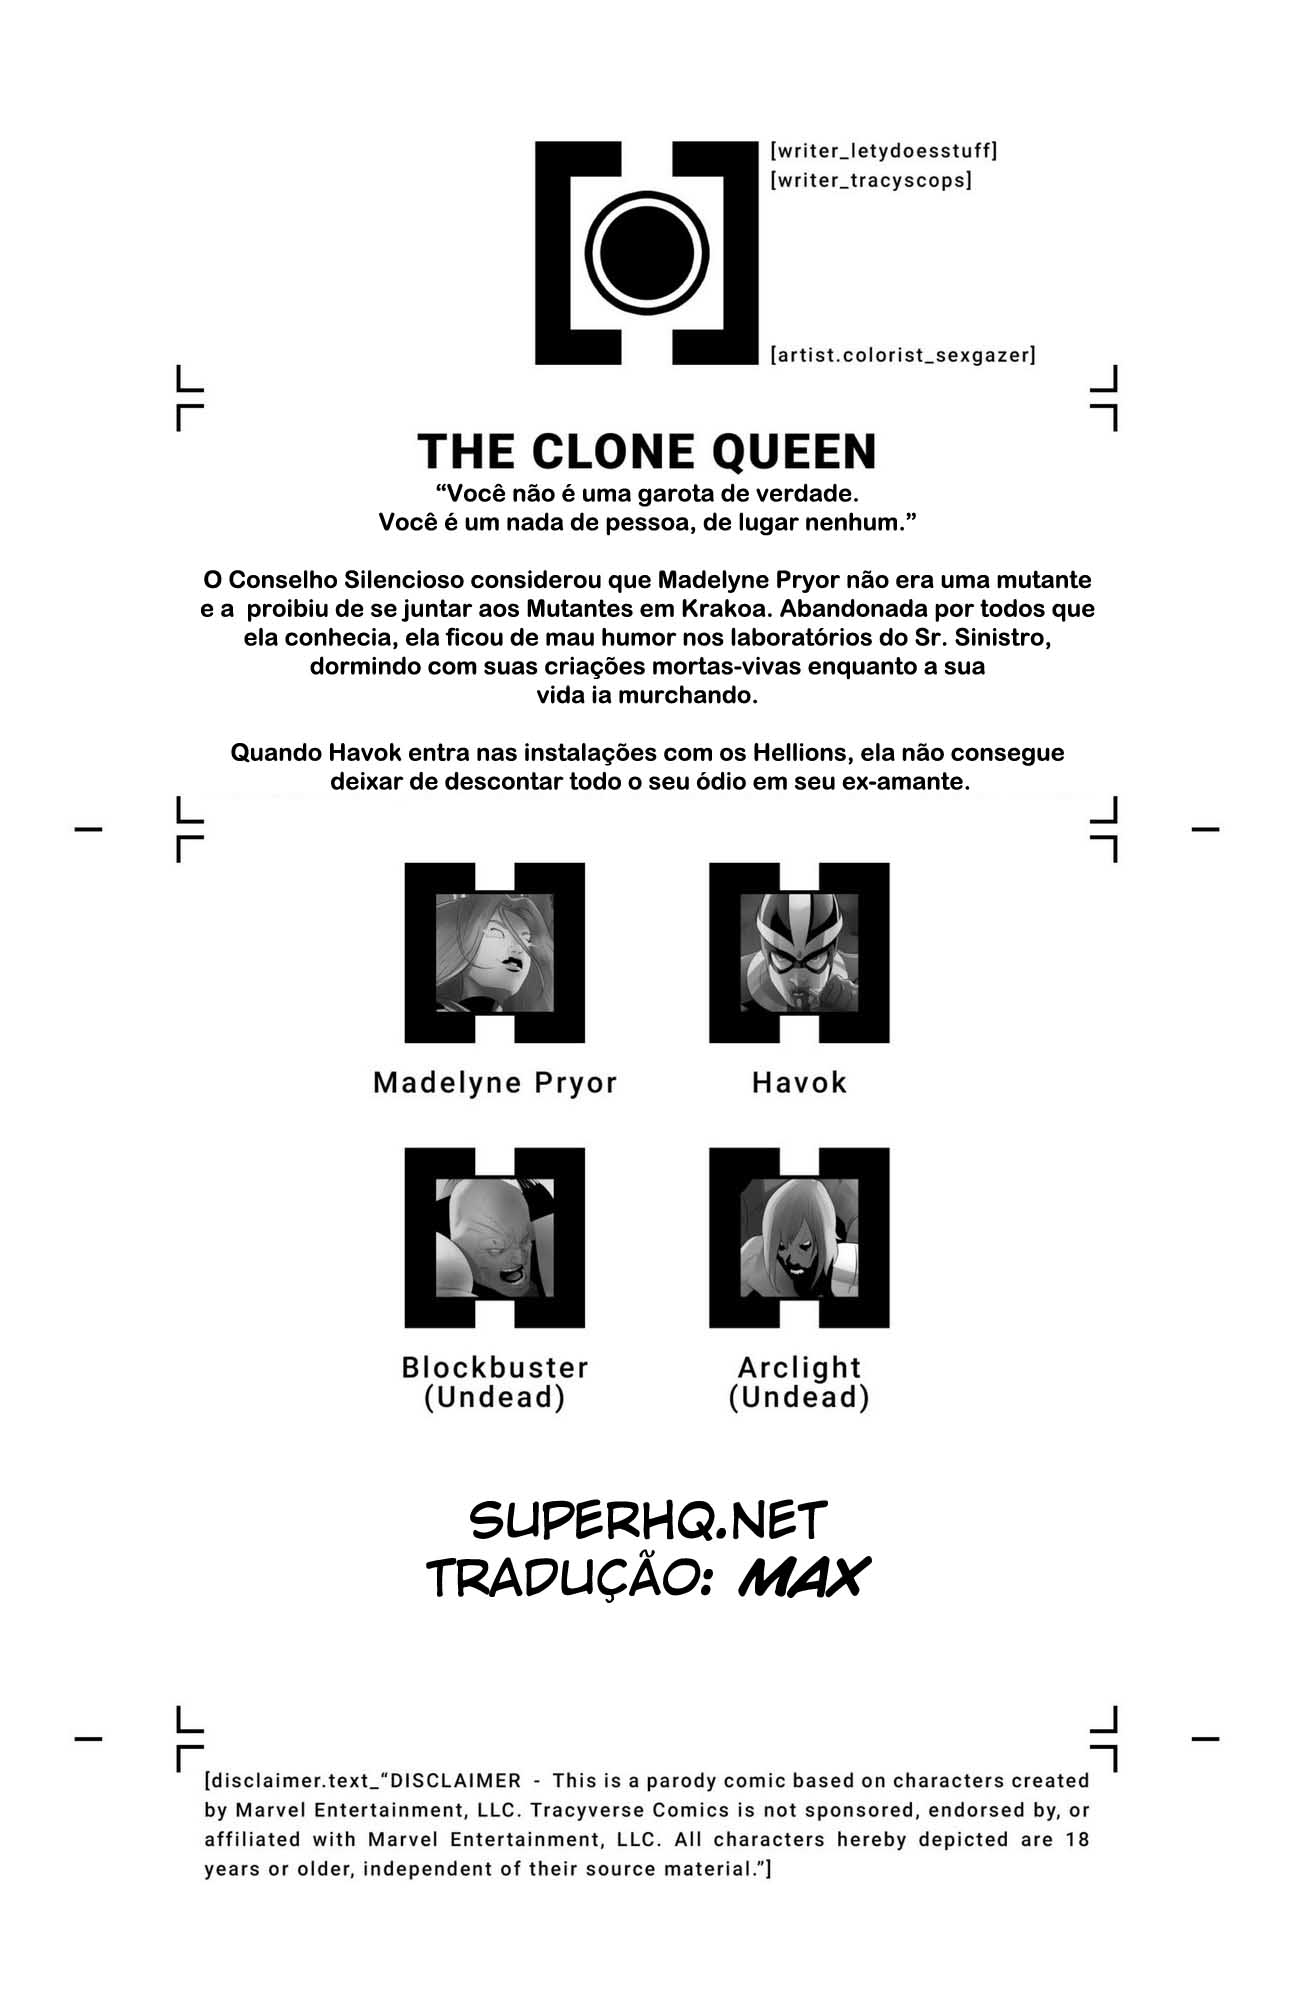 House of XXX, The Clone Queen - Foto 2